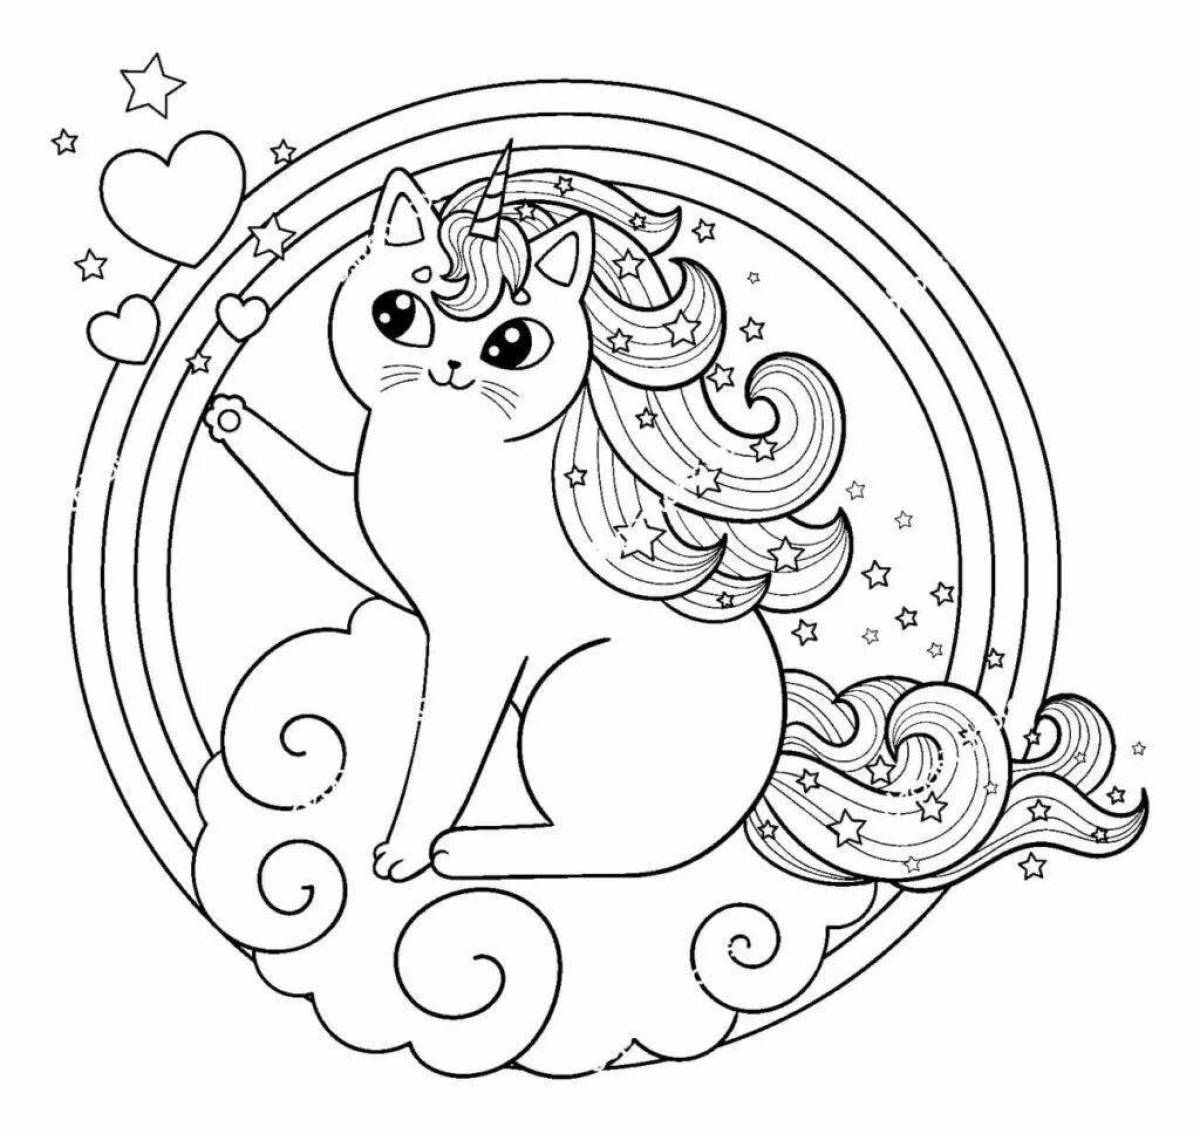 Exquisite unicorn kitty coloring book